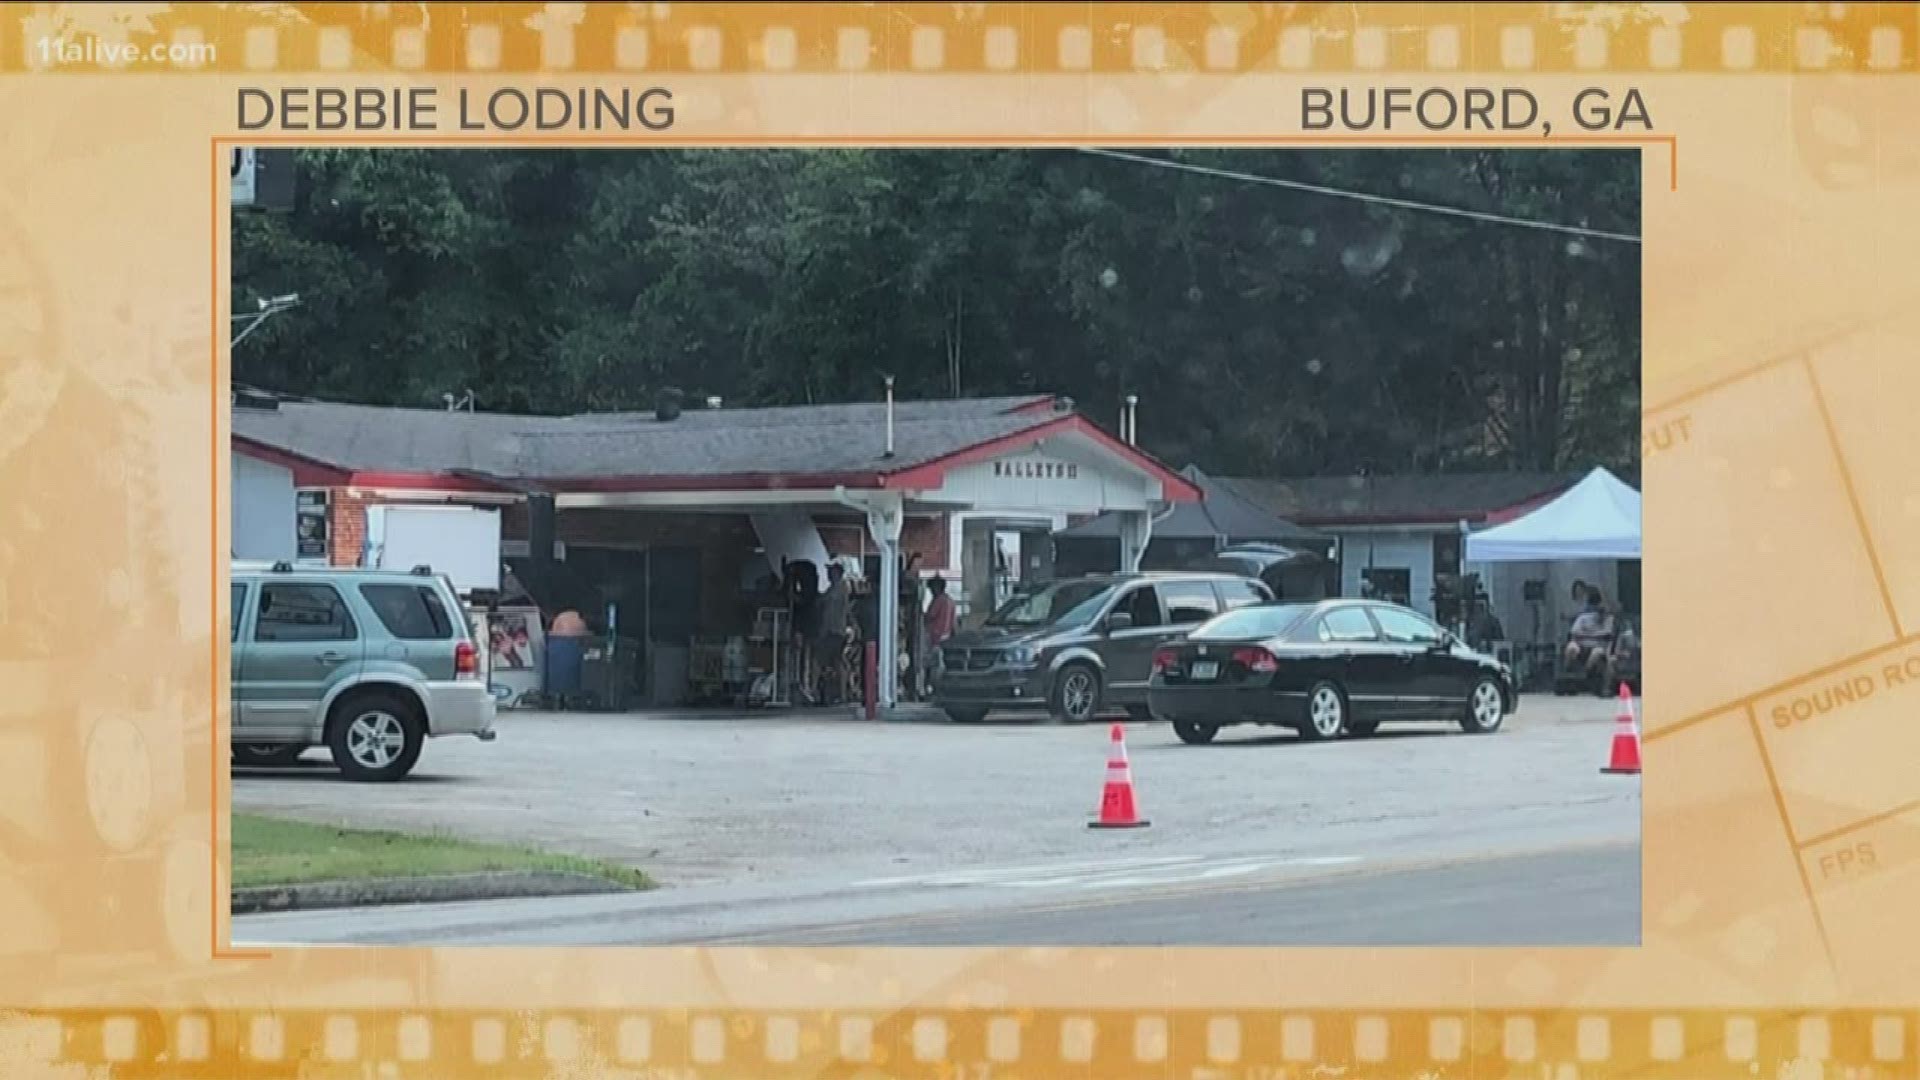 Primary filming for the show is at Lake Lanier, but crews were seen setting up 12 miles away in Buford.